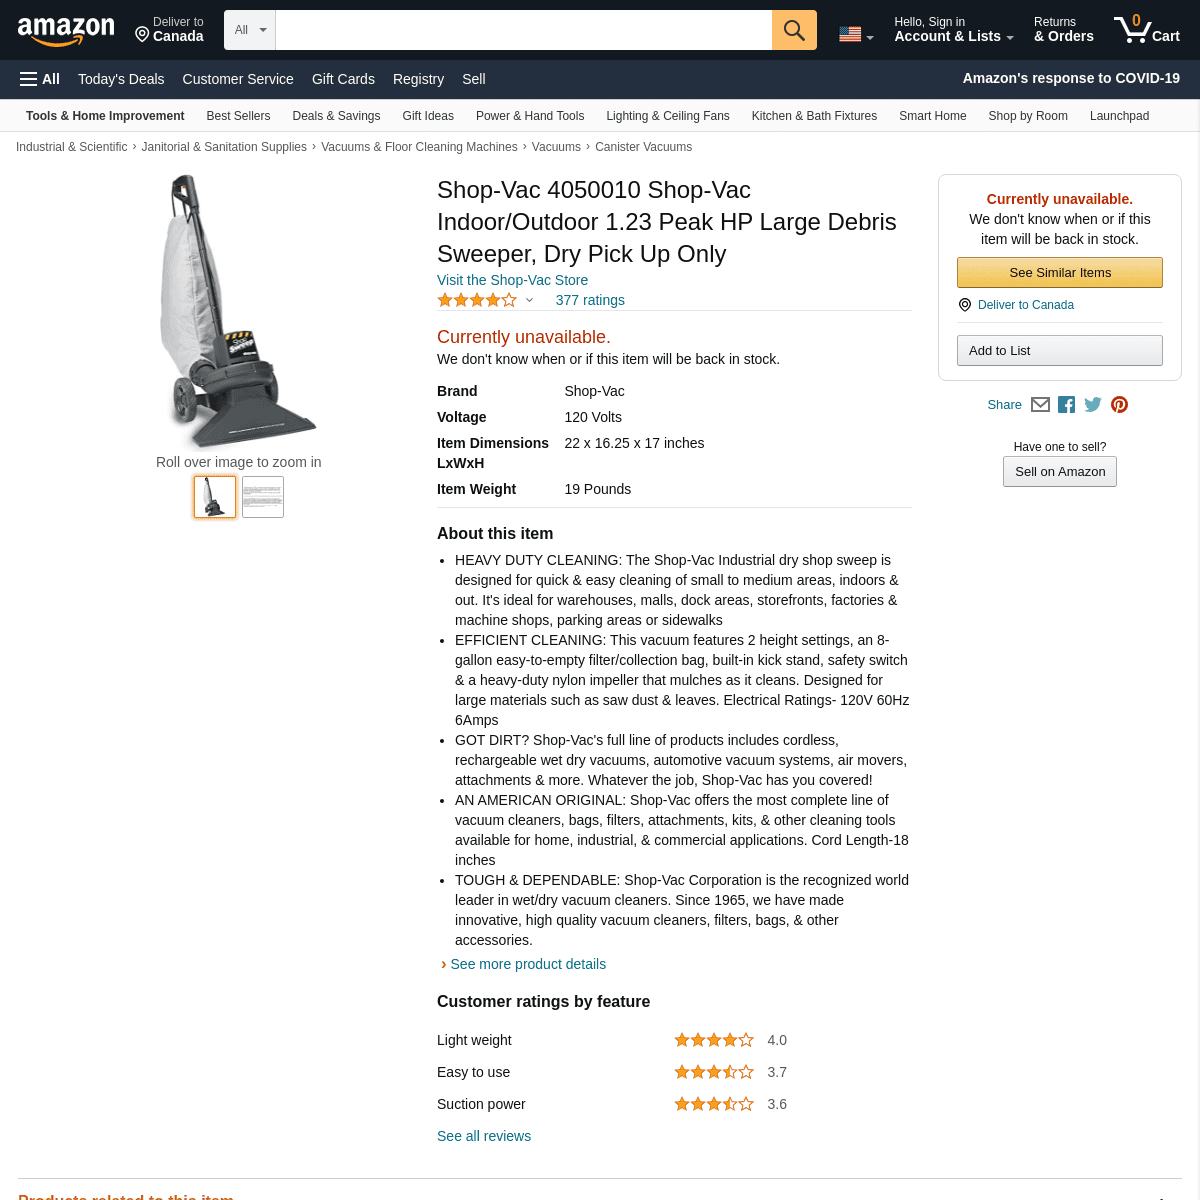 A complete backup of https://www.amazon.com/Shop-Vac-4050010-Outdoor-8-Gallon-Collection/dp/B00018ALEQ